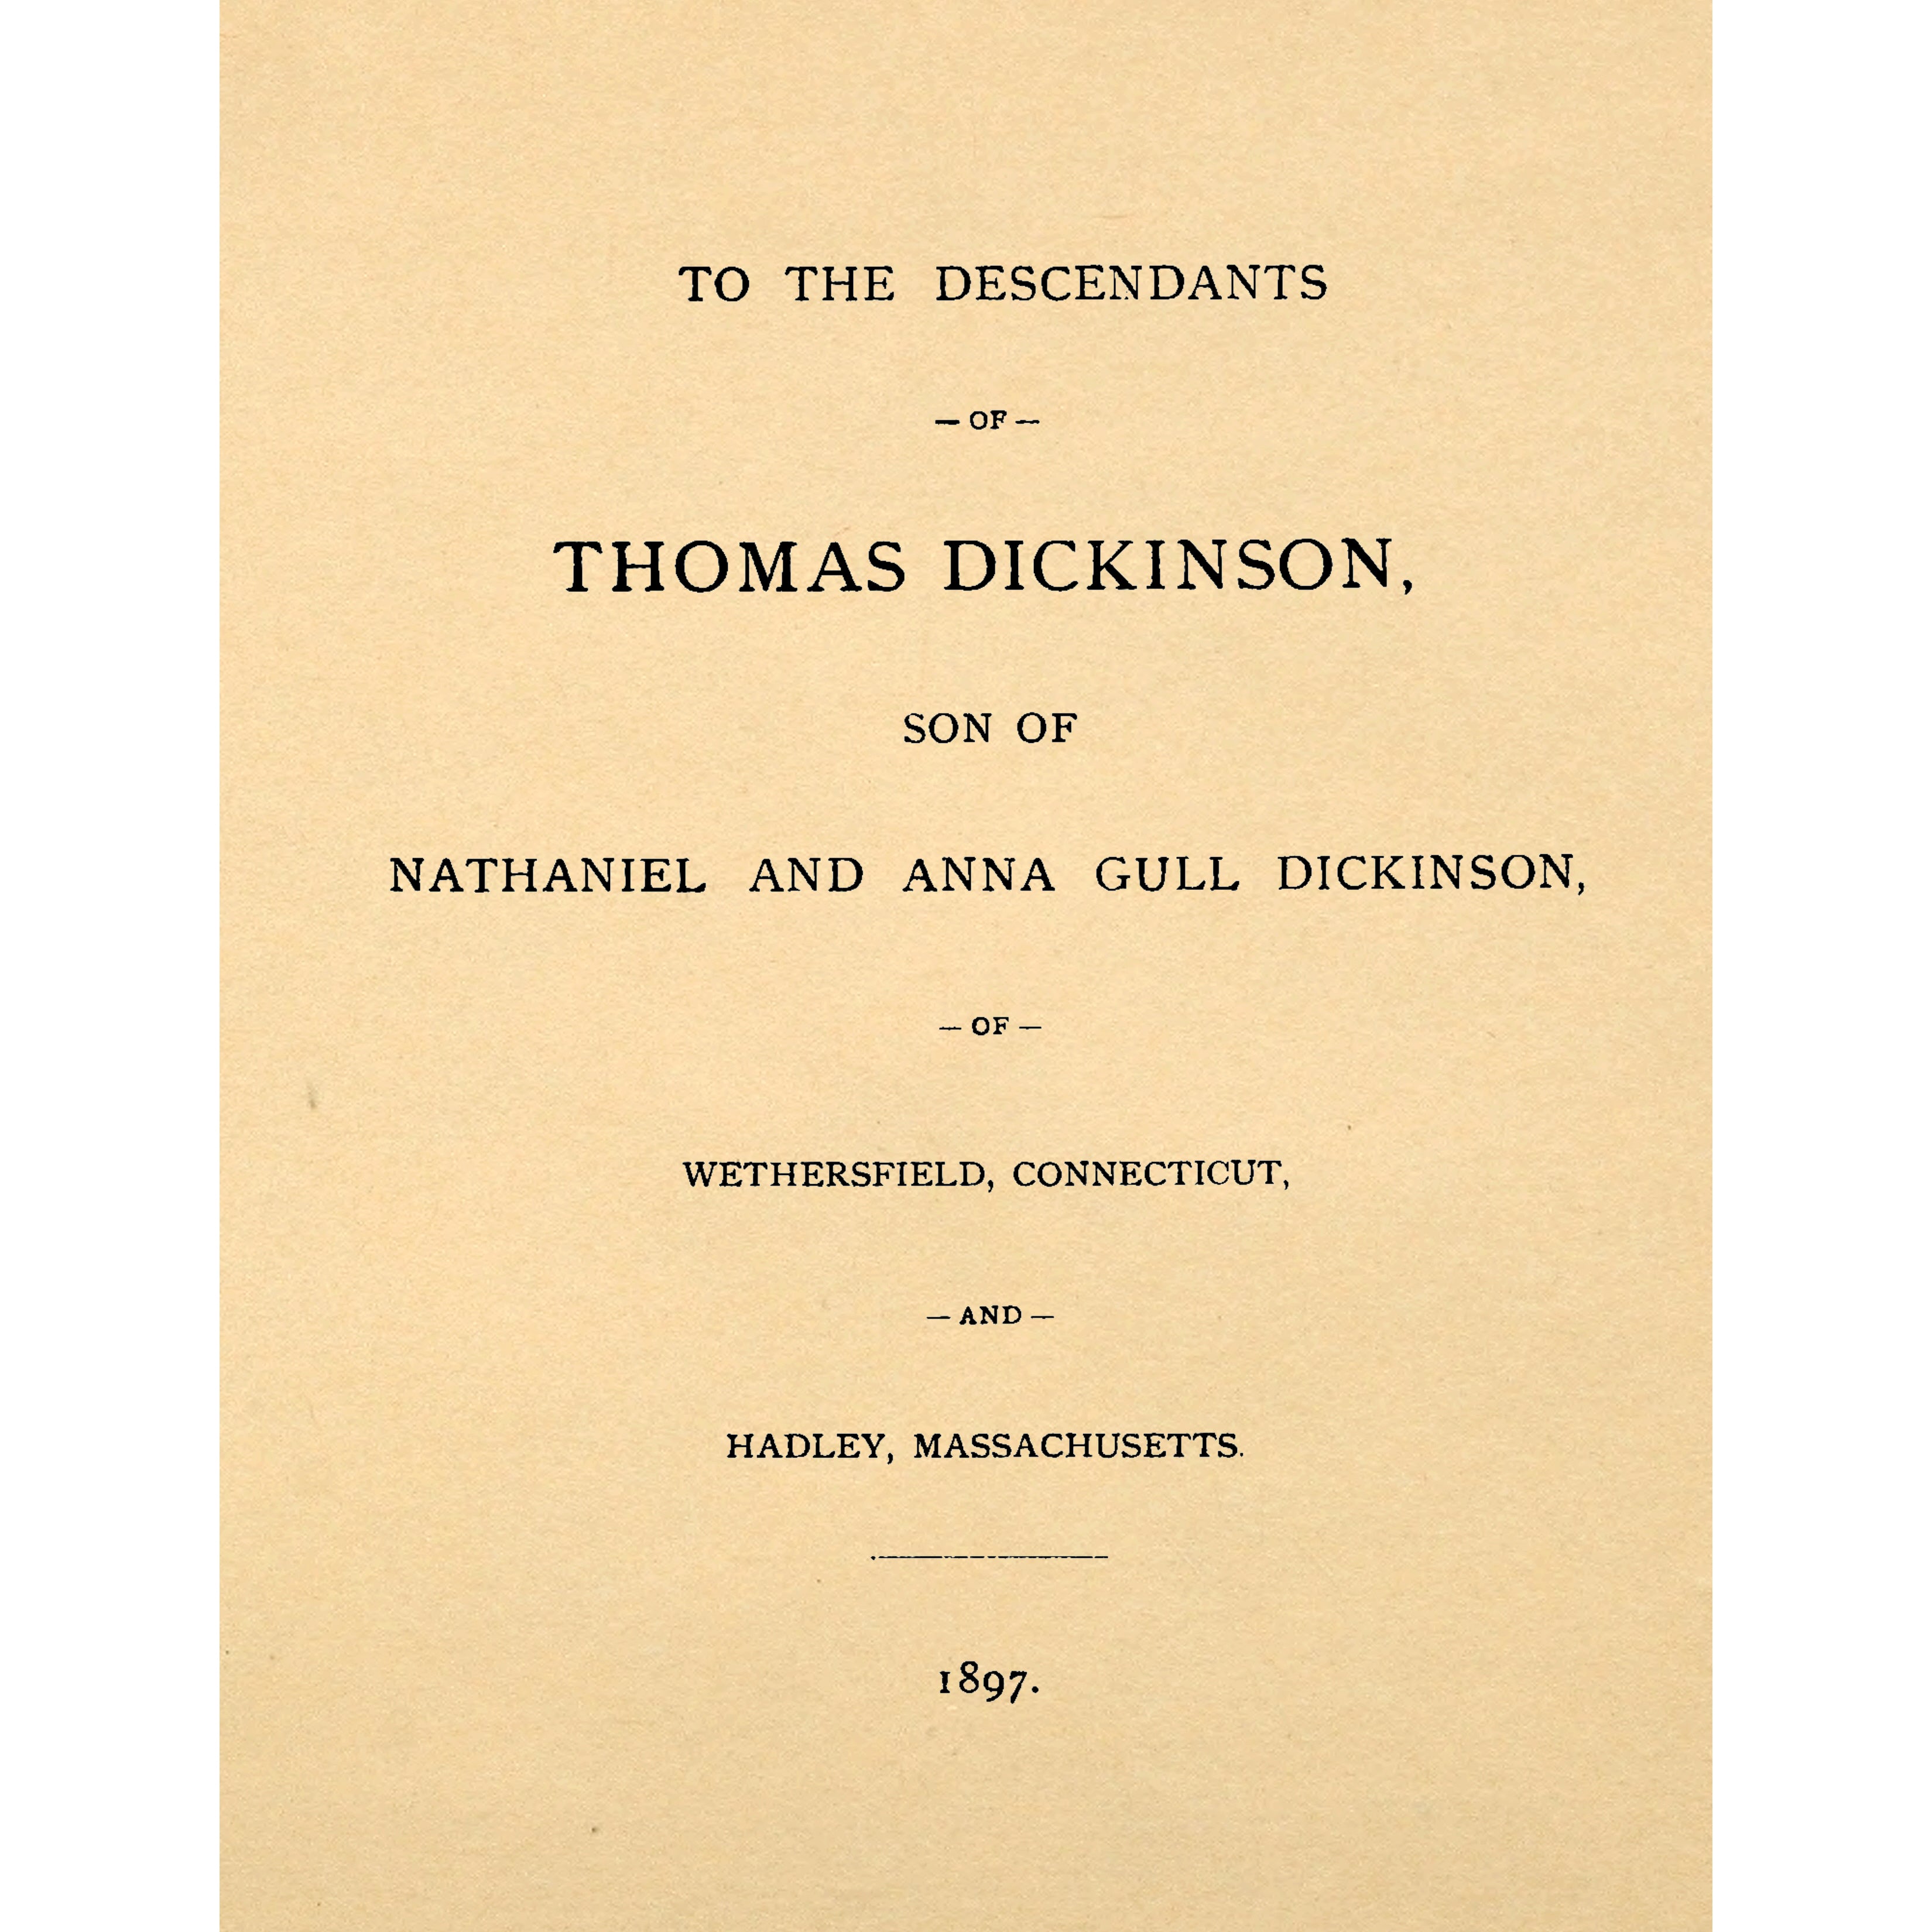 To the descendants of Thomas Dickinson, son of Nathaniel and Anna Gull Dickinson, of Wethersfield, Connecticut, and Hadley, Massachusetts